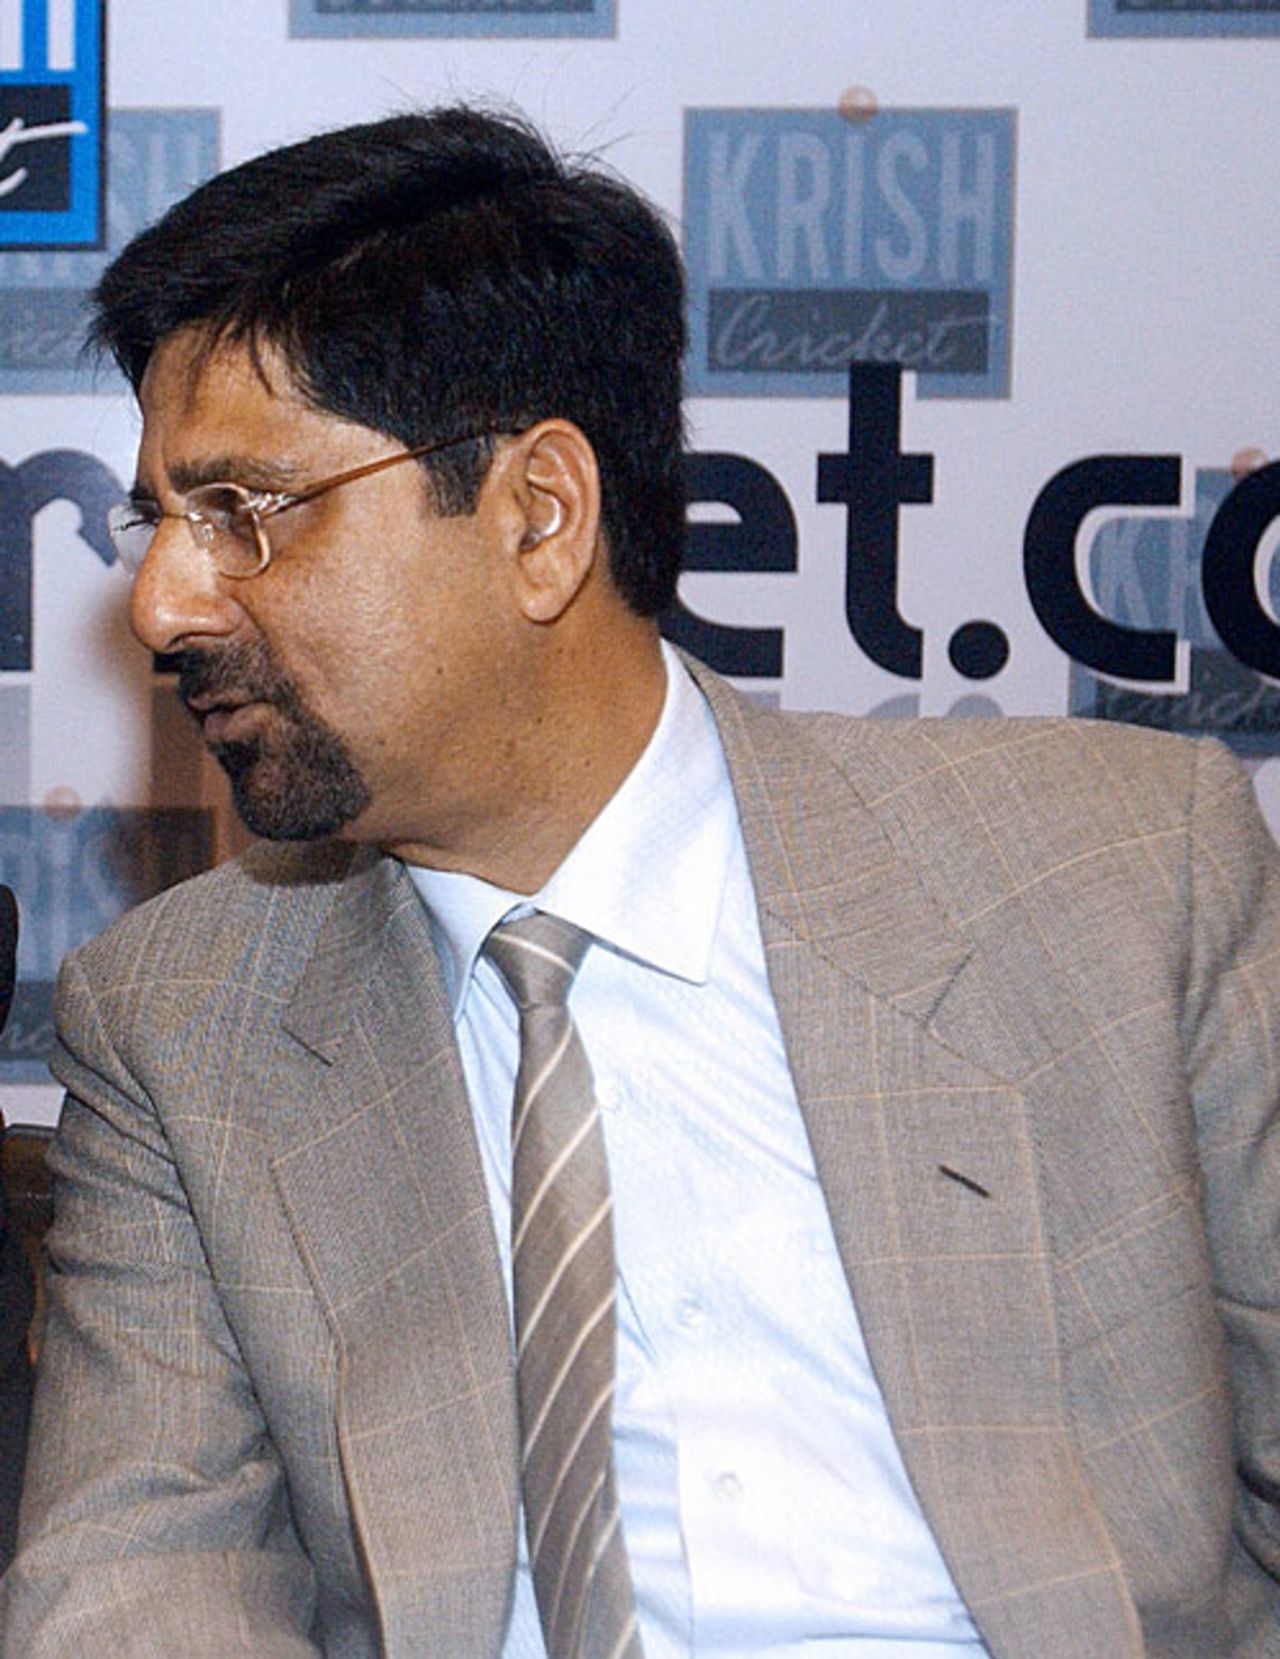 Kris Srikkanth at the launch of a website, New Delhi, May 29, 2006